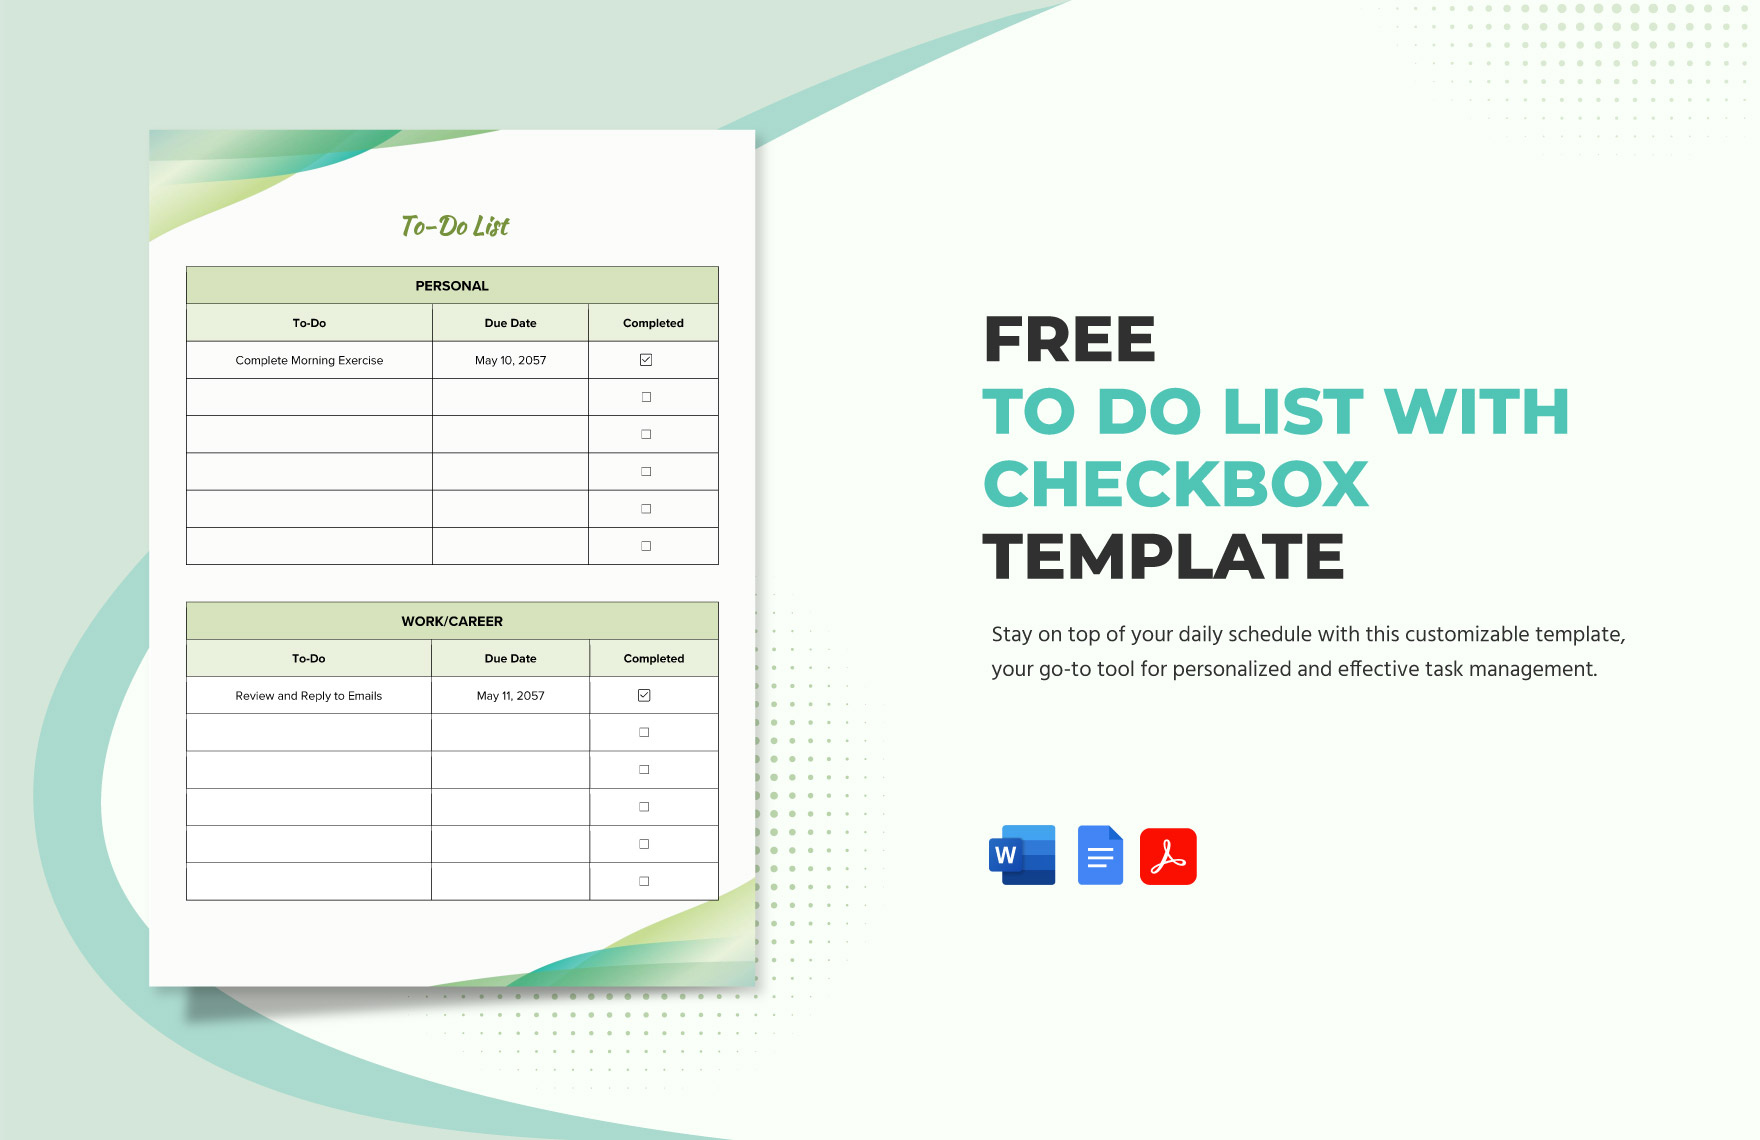 To Do List with Checkbox Template